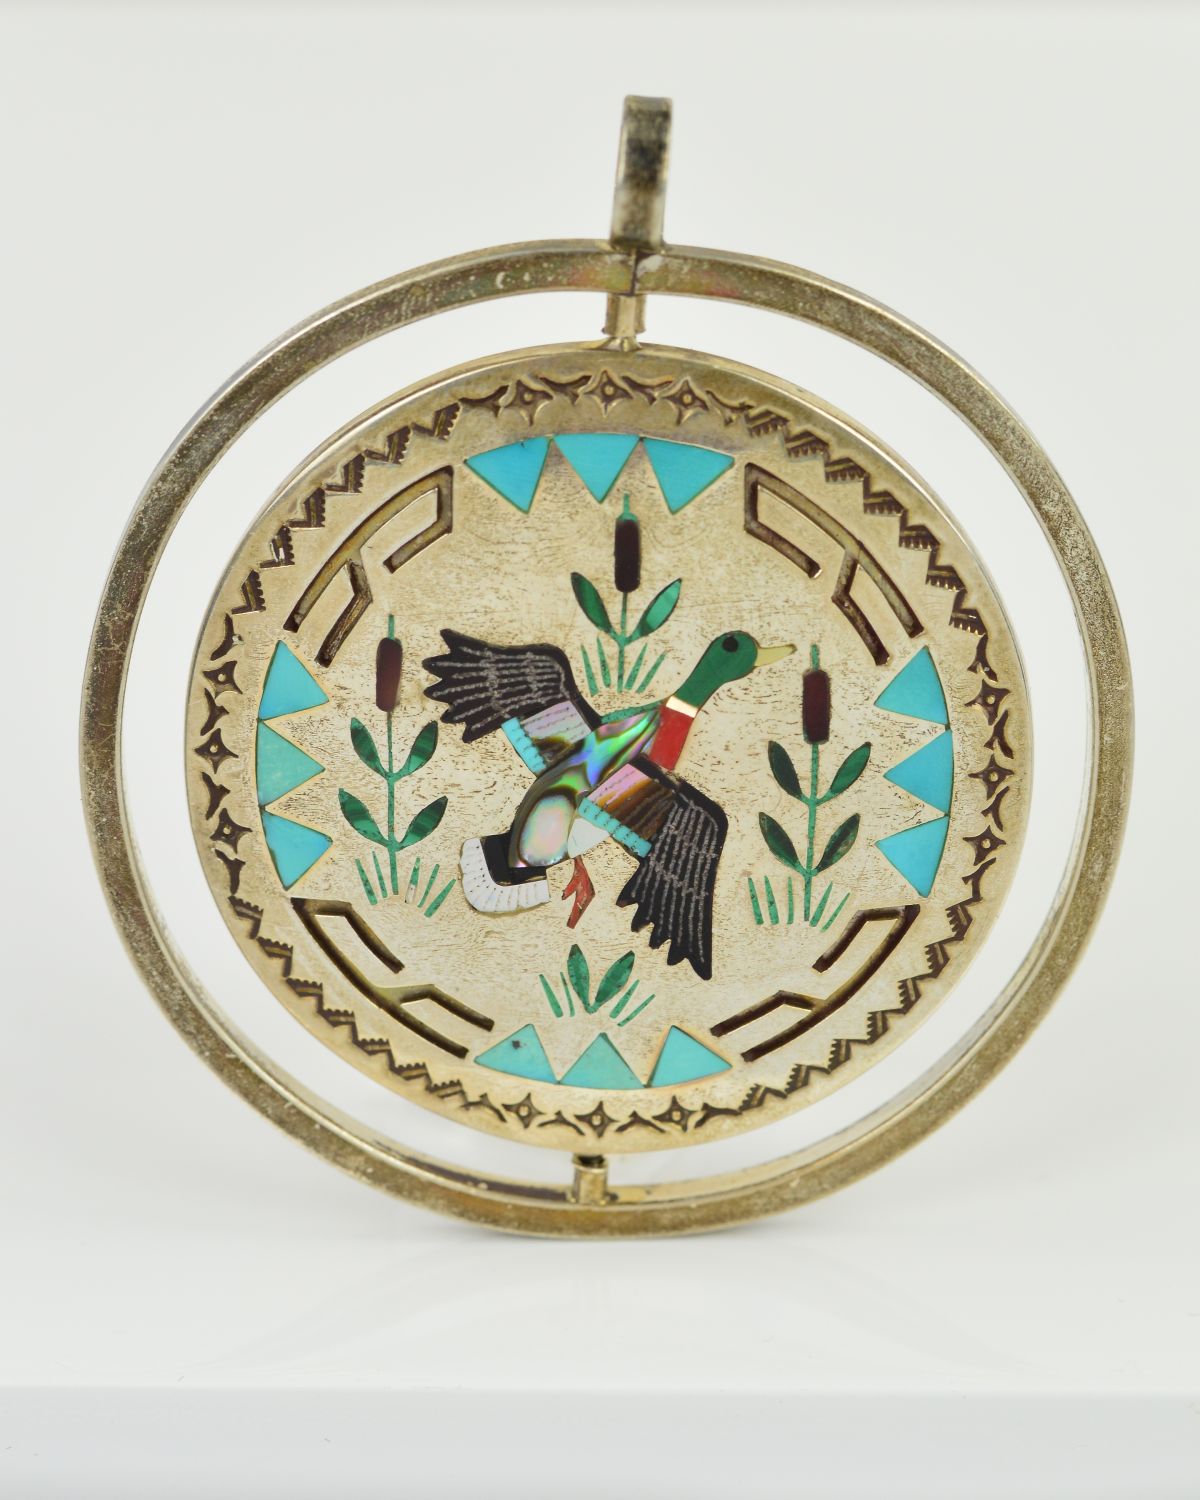 A PENDANT of circular outline, the central rotating disc within a circular surround, the central